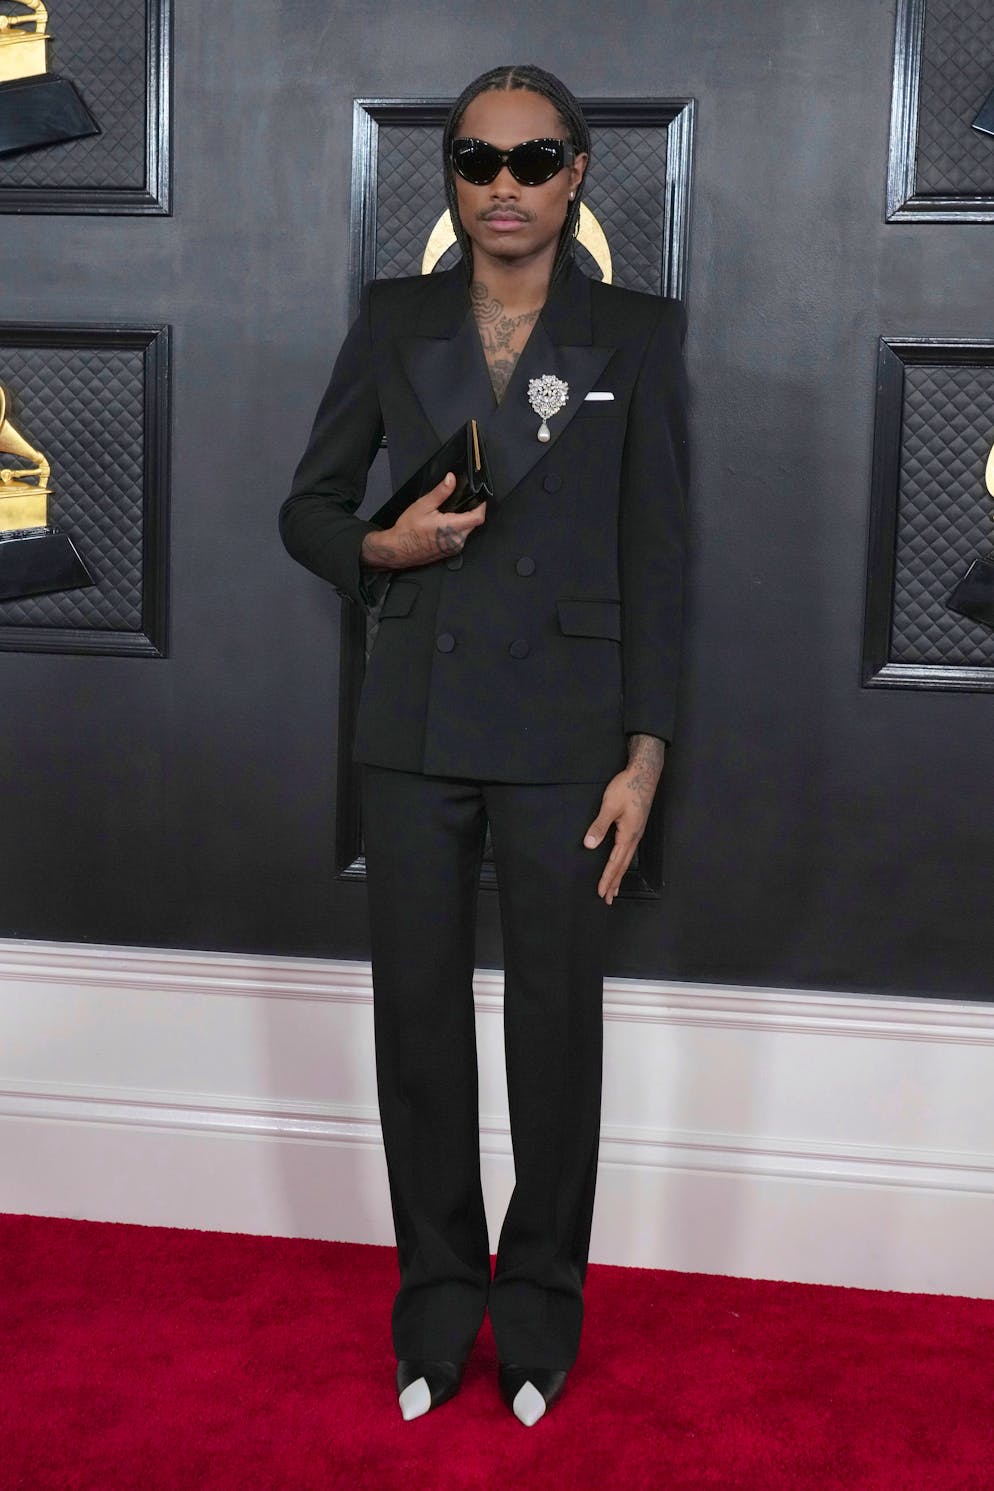 Steve Lacy arrives at the 65th annual Grammy Awards on Sunday, Feb. 5, 2023, in Los Angeles. (Photo by Jordan Strauss/Invision/AP)